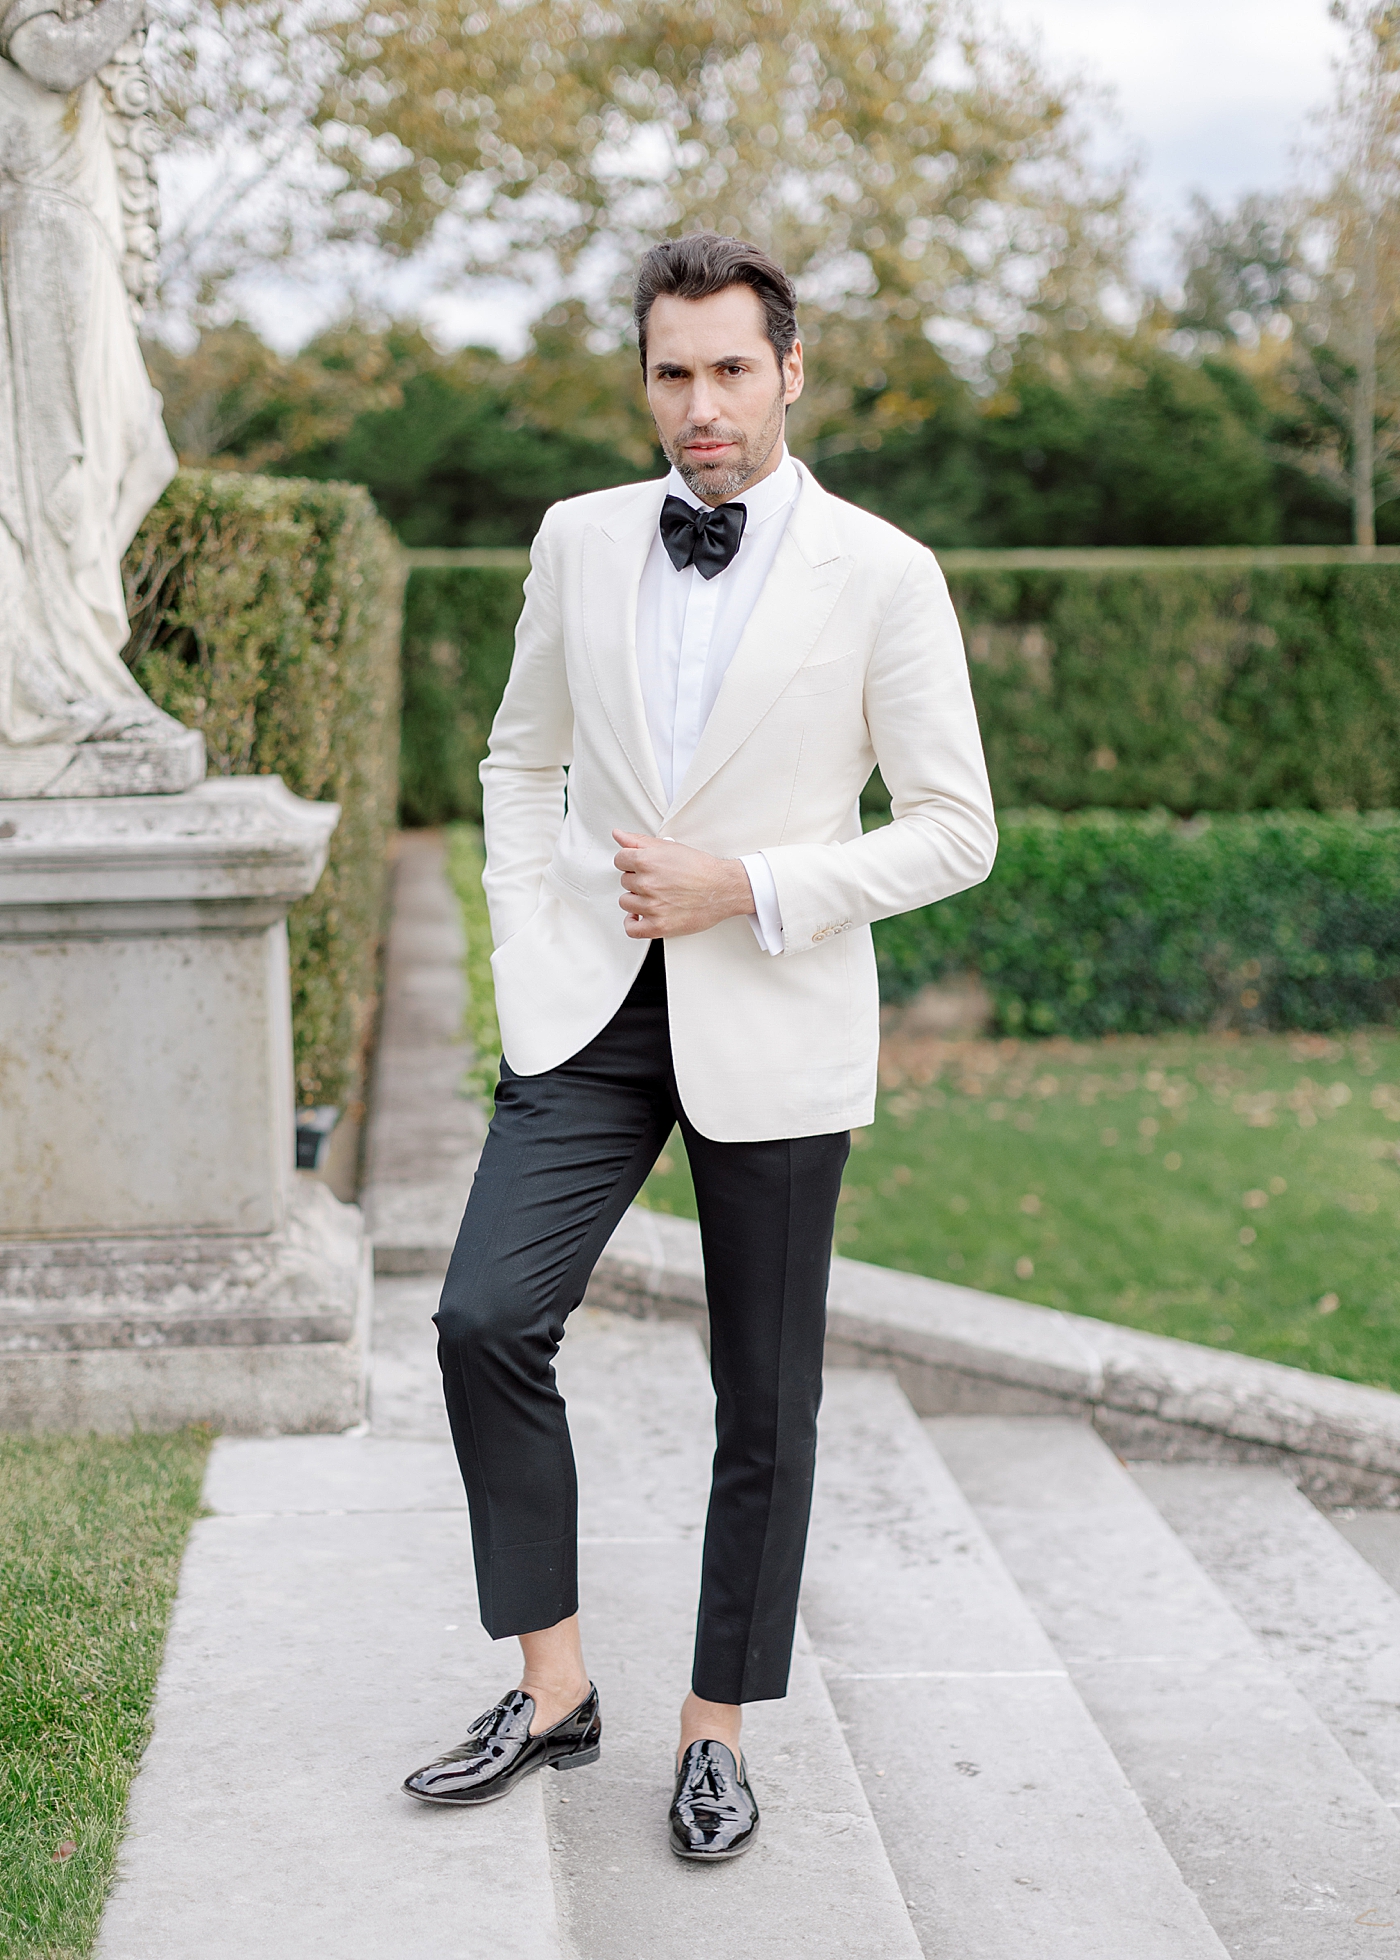 Groom posing on steps during Oheka castle wedding | Image by Hope Helmuth Photography